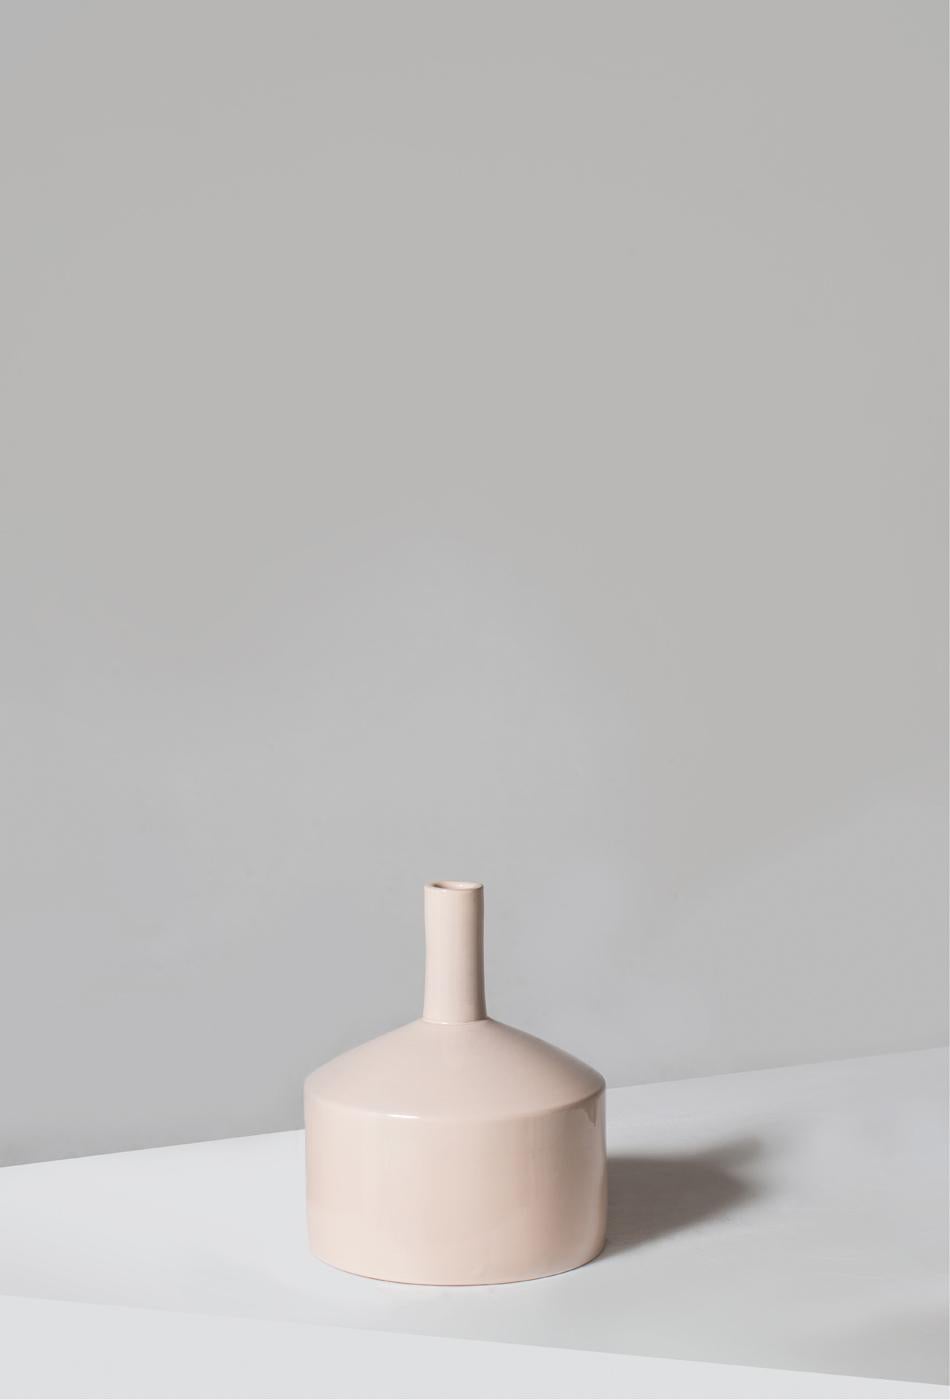 Earth-Toned Abba Collection of Ceramic Vases Celebrates Ancient Water Urns im Zustand „Neu“ im Angebot in Santadi, SU